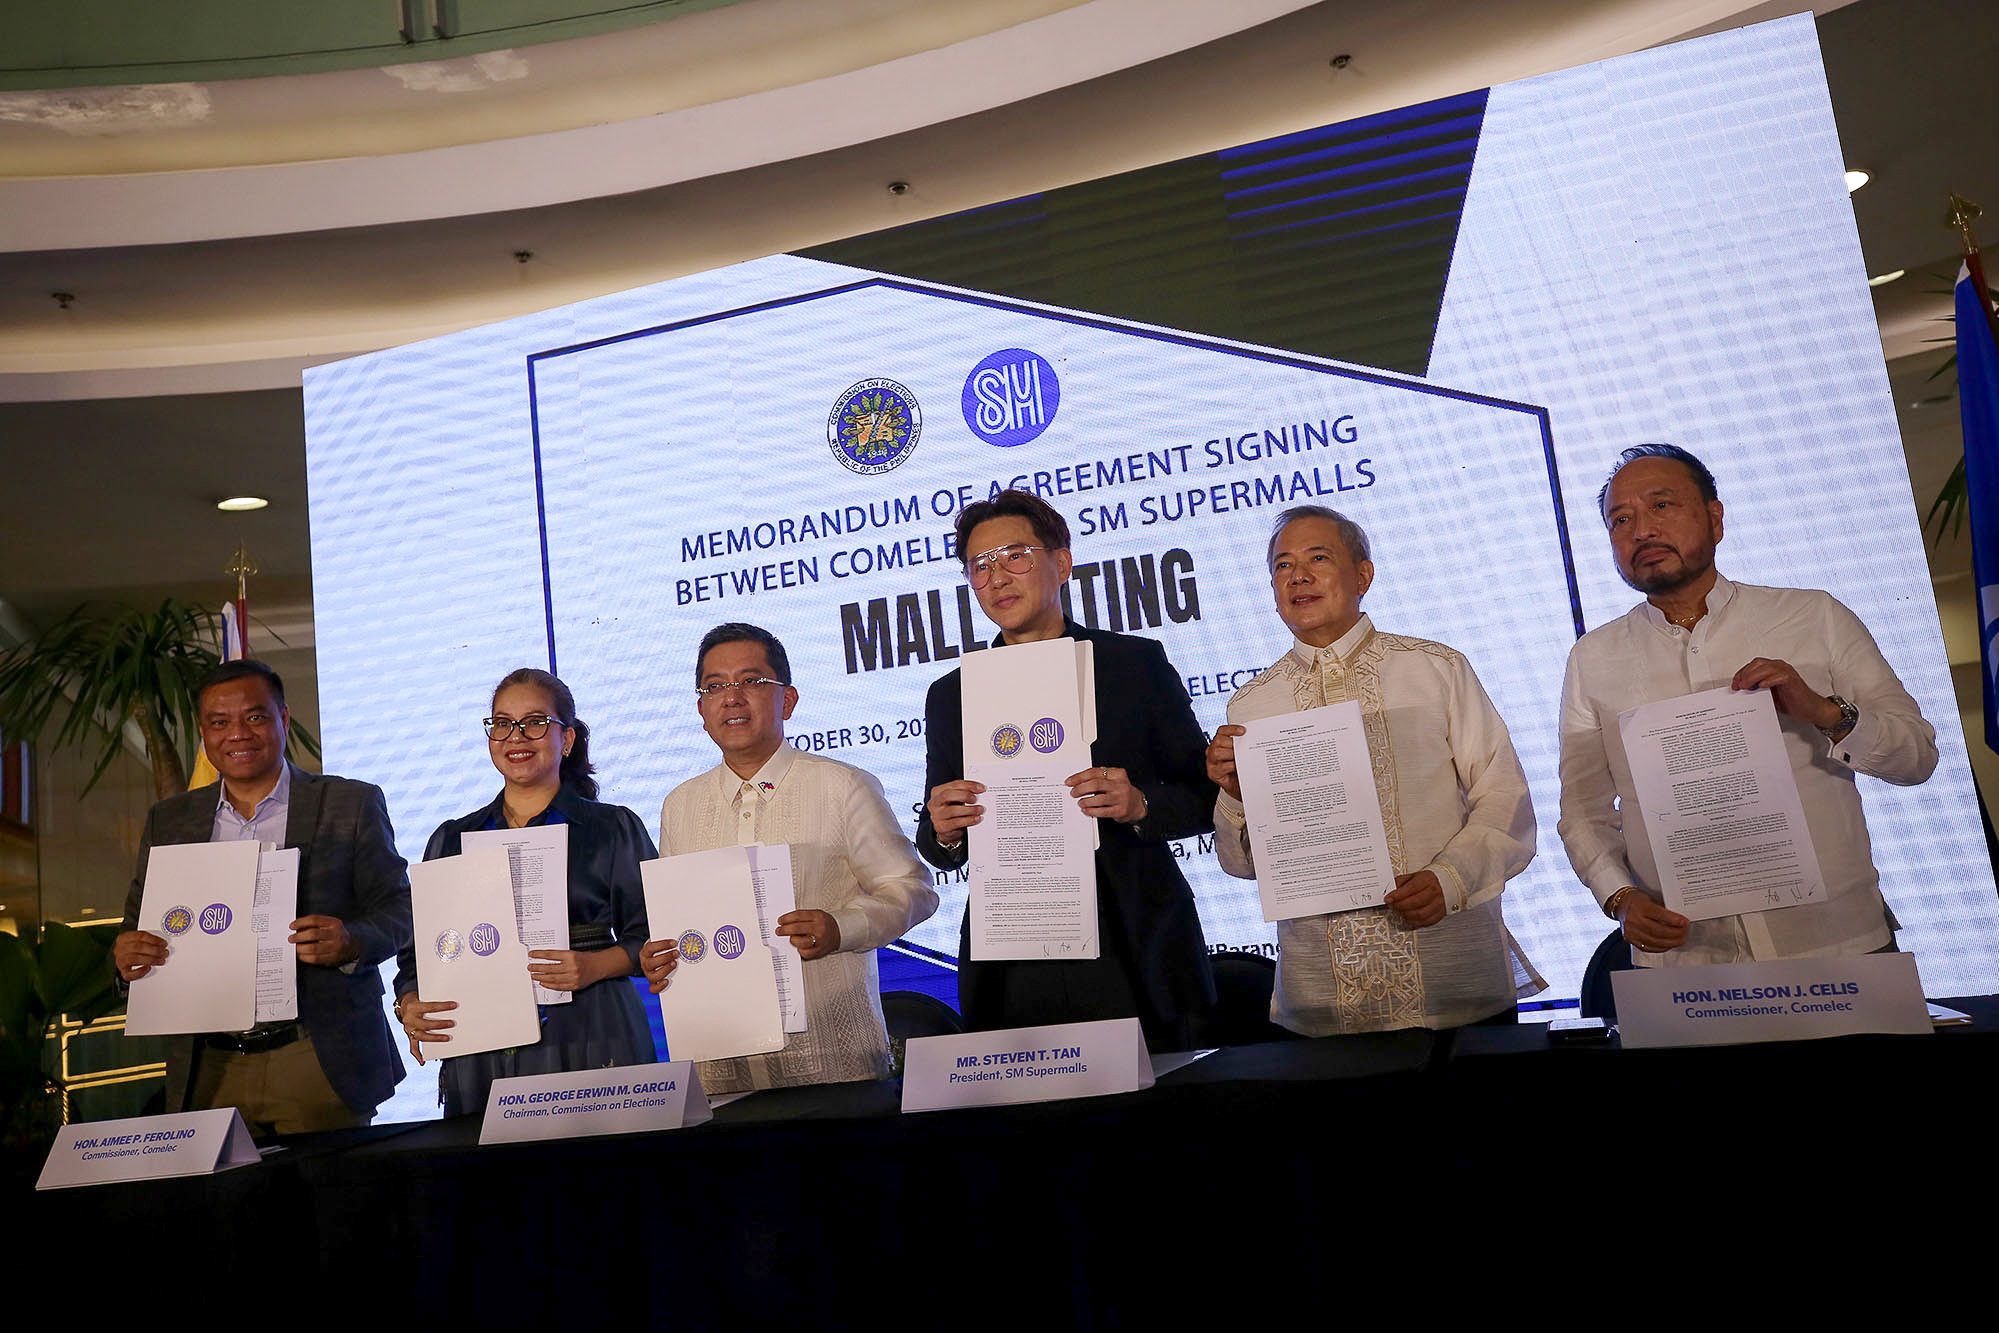 For 2023 barangay polls, Comelec pushes through with first-ever mall voting